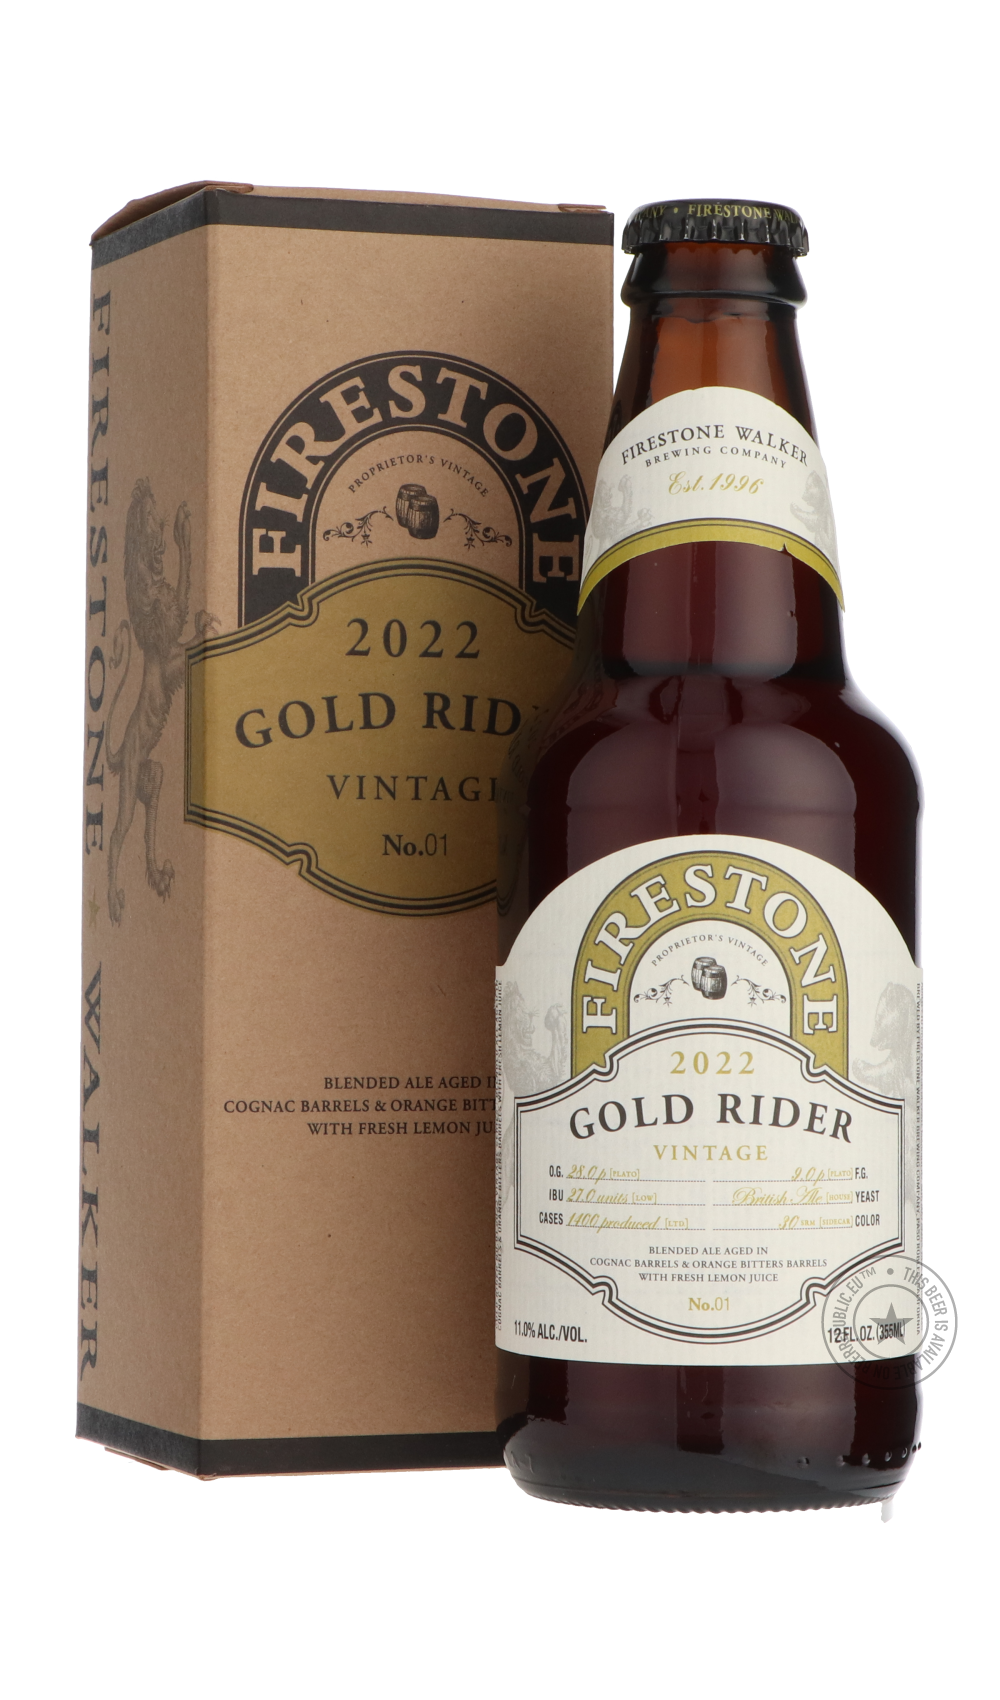 -Firestone Walker- Gold Rider-Brown & Dark- Only @ Beer Republic - The best online beer store for American & Canadian craft beer - Buy beer online from the USA and Canada - Bier online kopen - Amerikaans bier kopen - Craft beer store - Craft beer kopen - Amerikanisch bier kaufen - Bier online kaufen - Acheter biere online - IPA - Stout - Porter - New England IPA - Hazy IPA - Imperial Stout - Barrel Aged - Barrel Aged Imperial Stout - Brown - Dark beer - Blond - Blonde - Pilsner - Lager - Wheat - Weizen - Am